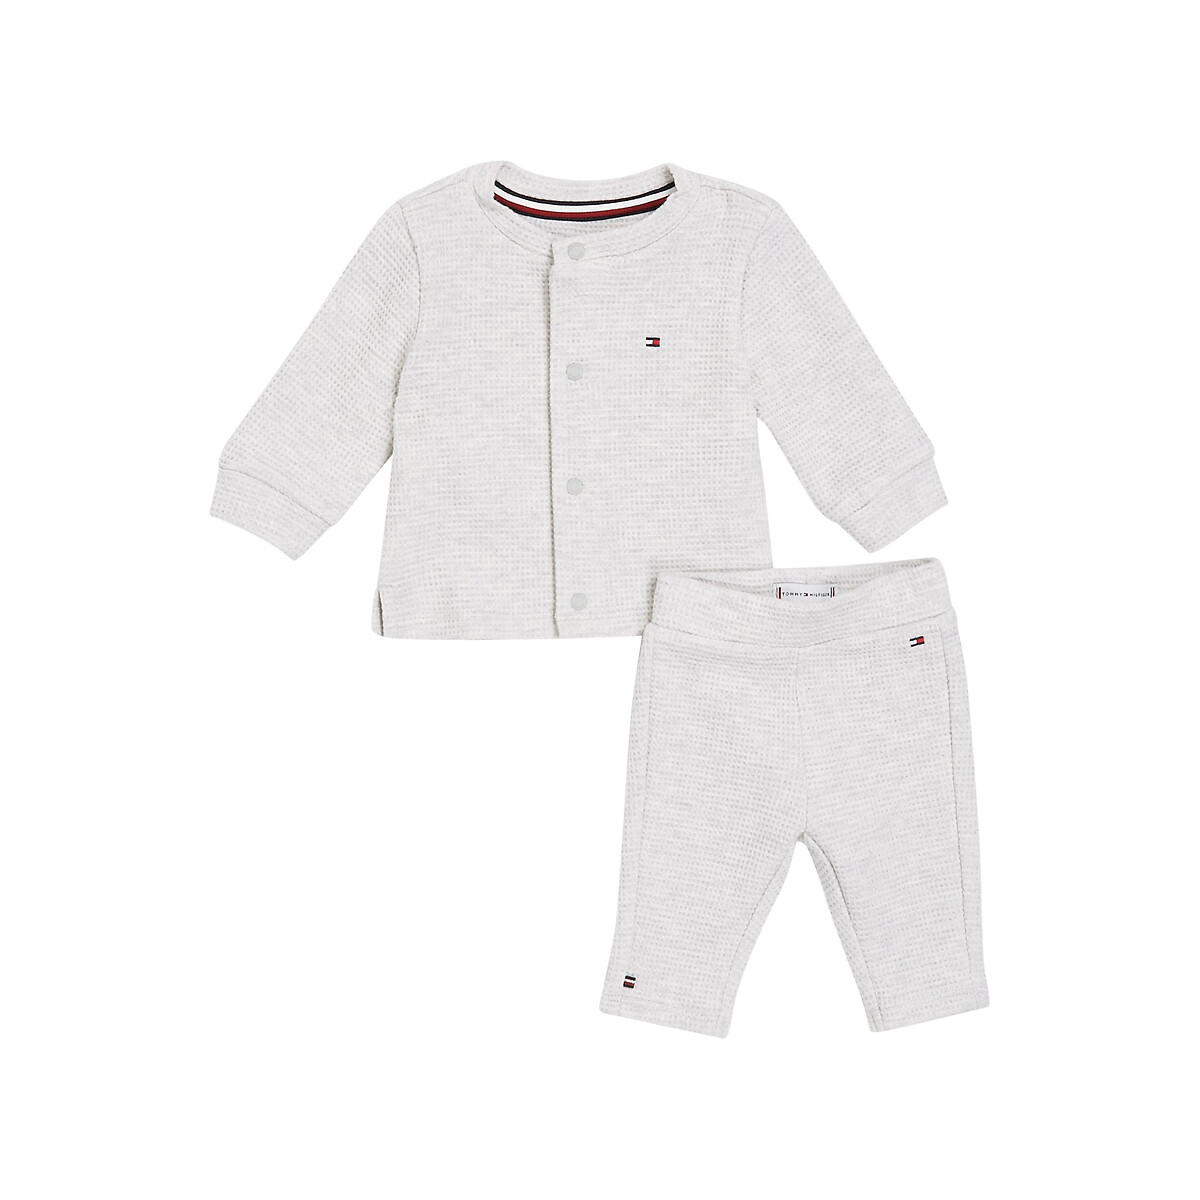 Image of Baby's 2-Piece Outfit in Cotton